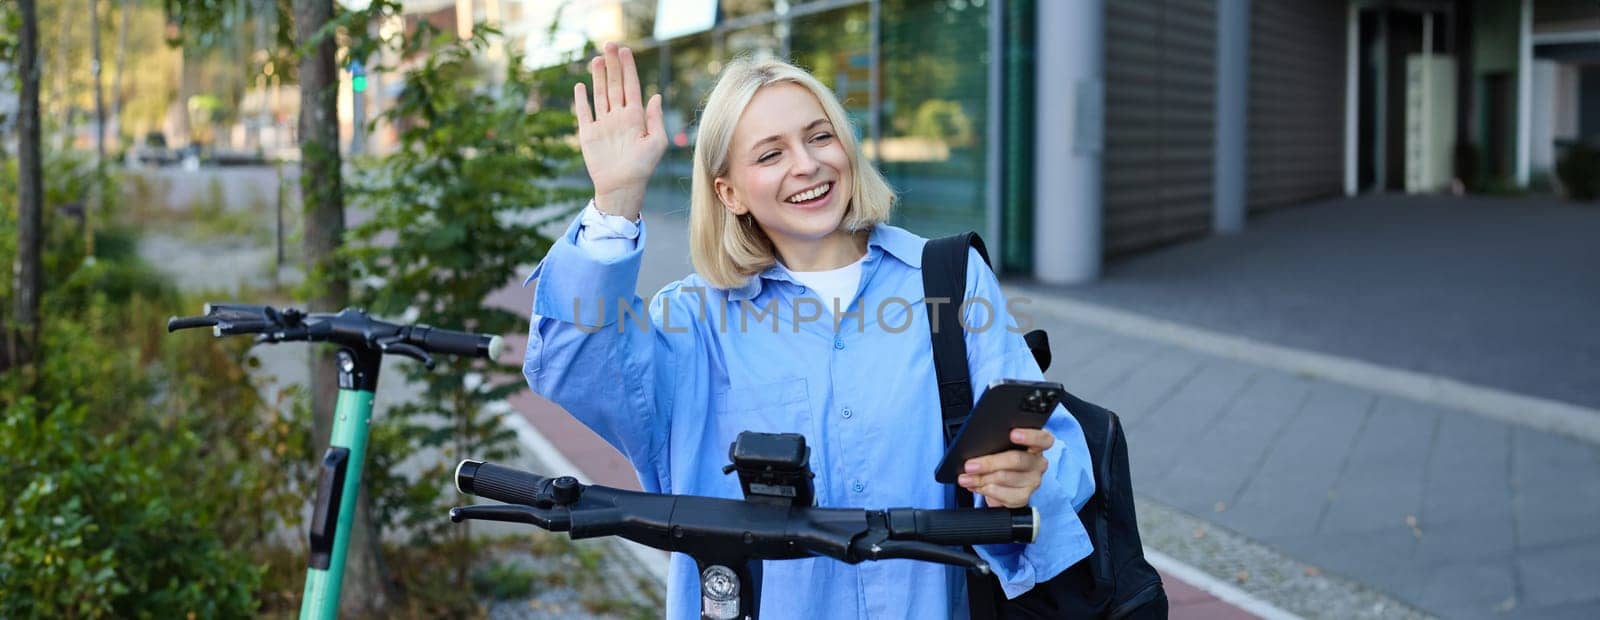 Young cheerful woman, tried to scan QR code on electric scooter on street, using mobile phone to rent it, saying hello to friend and waving hand at someone.